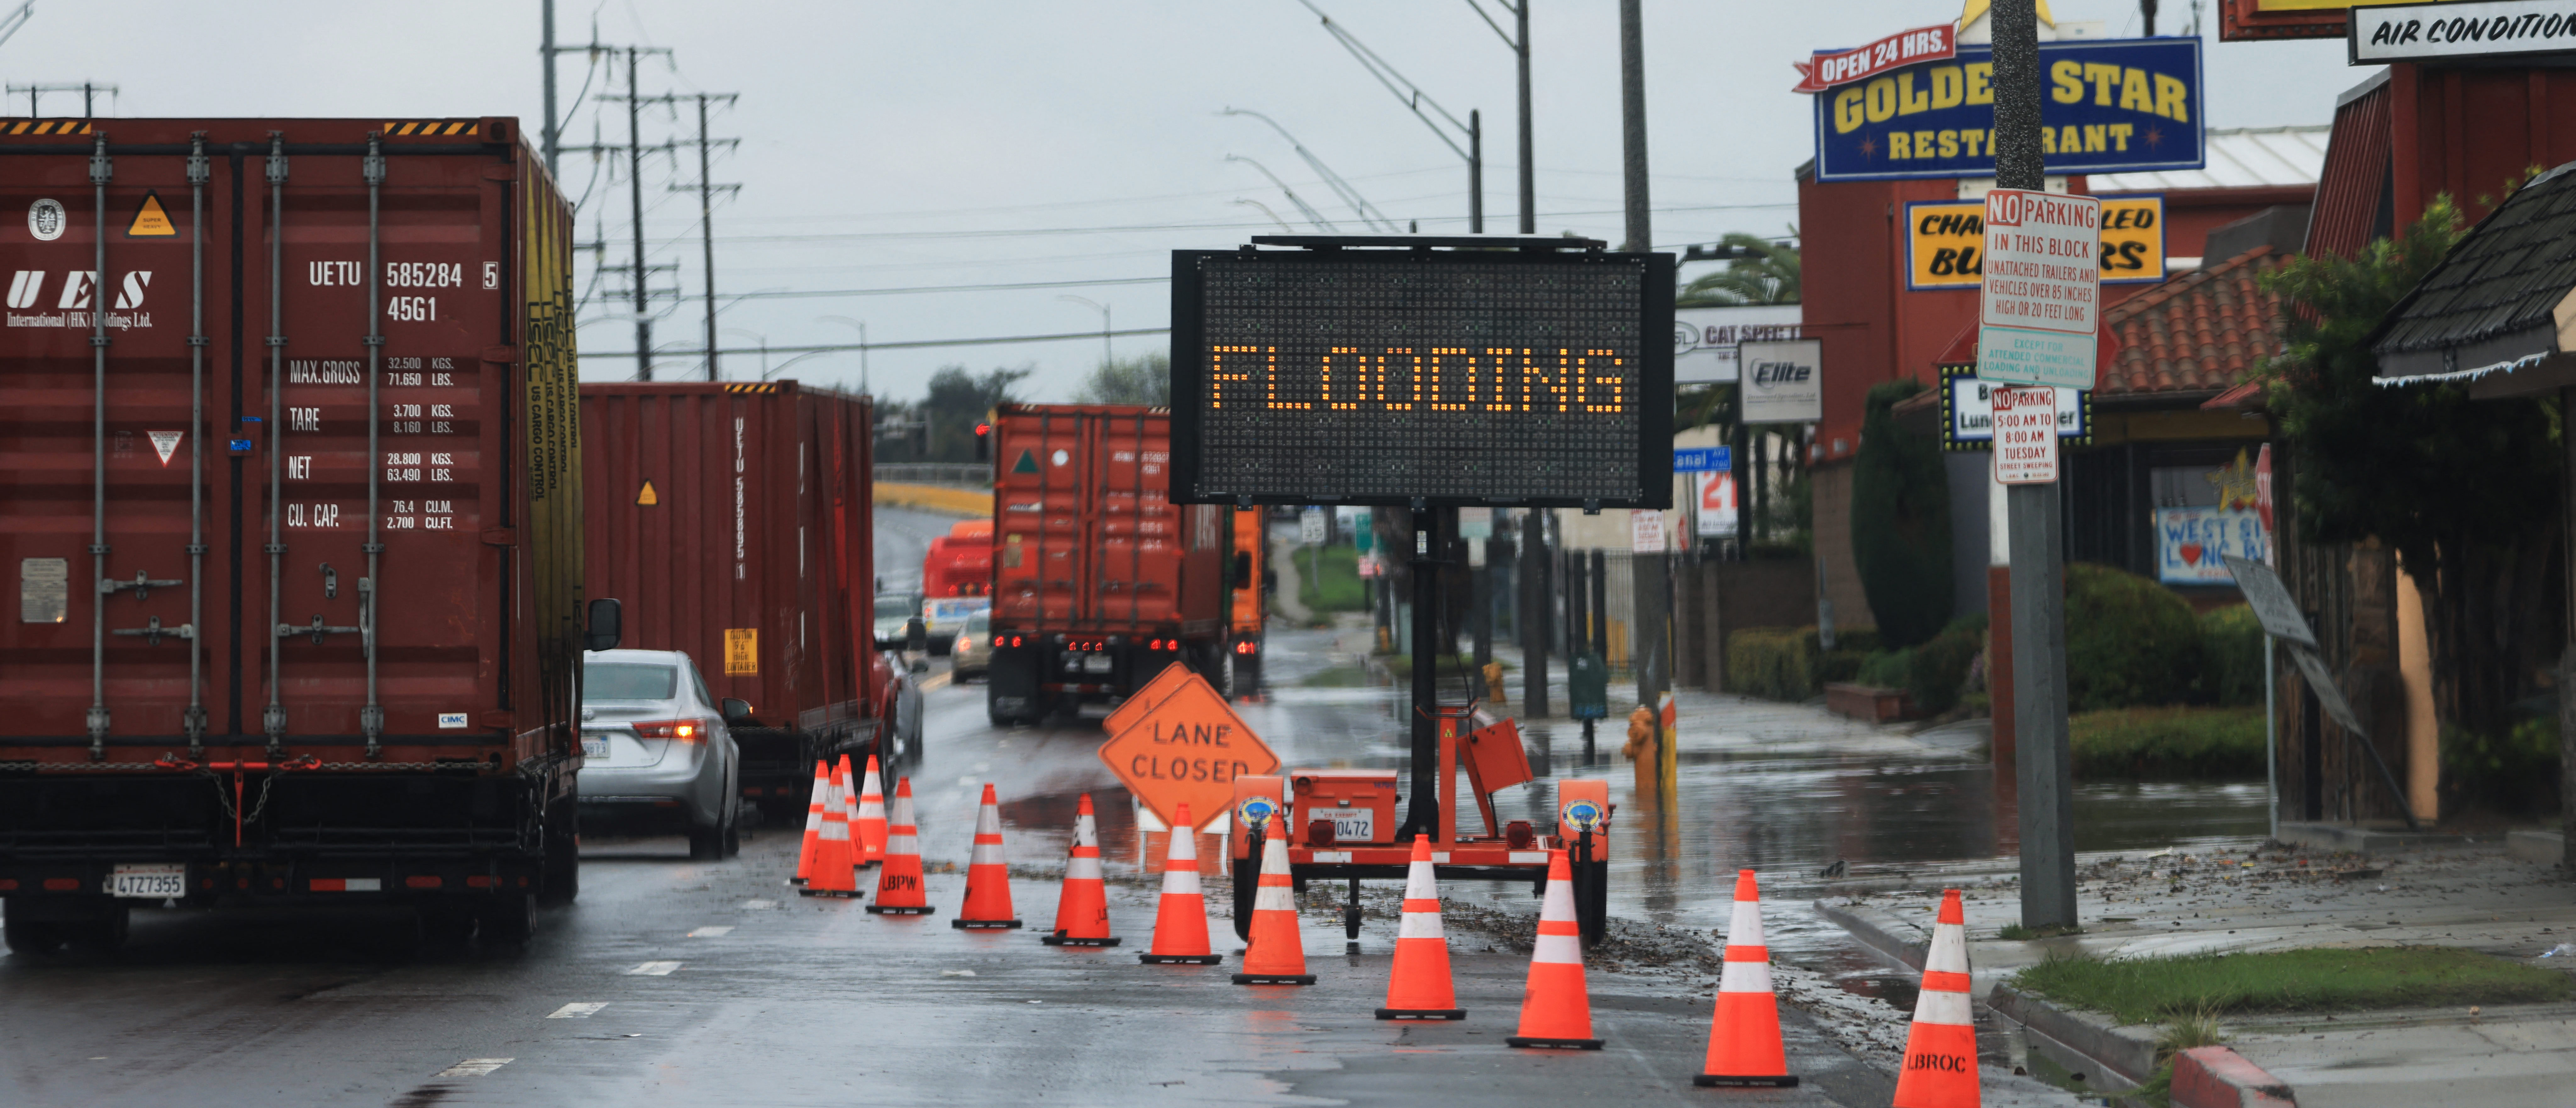 Flooding signs are placed by a road during a rain storm in Long Beach, California, on February 1, 2024. The US West Coast was getting drenched February 1, 2024 as the first of two powerful storms moved in, part of a "Pineapple Express" weather pattern that was washing out roads and sparking flood warnings. (Photo by David SWANSON / AFP) (